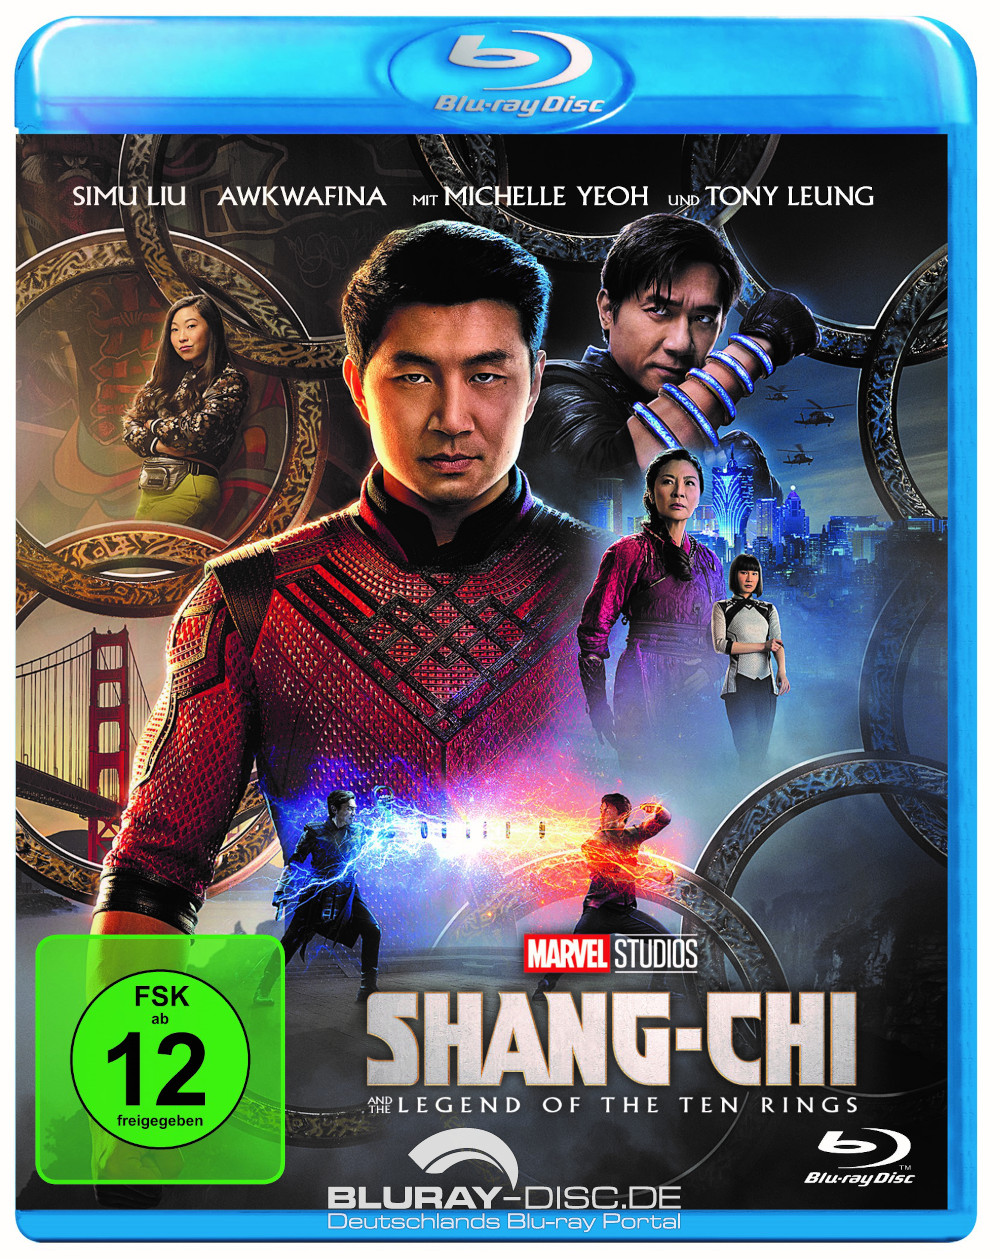 Shang-Chi-and-the-Legend-of-the-Ten-Rings-Galerie-02.jpg